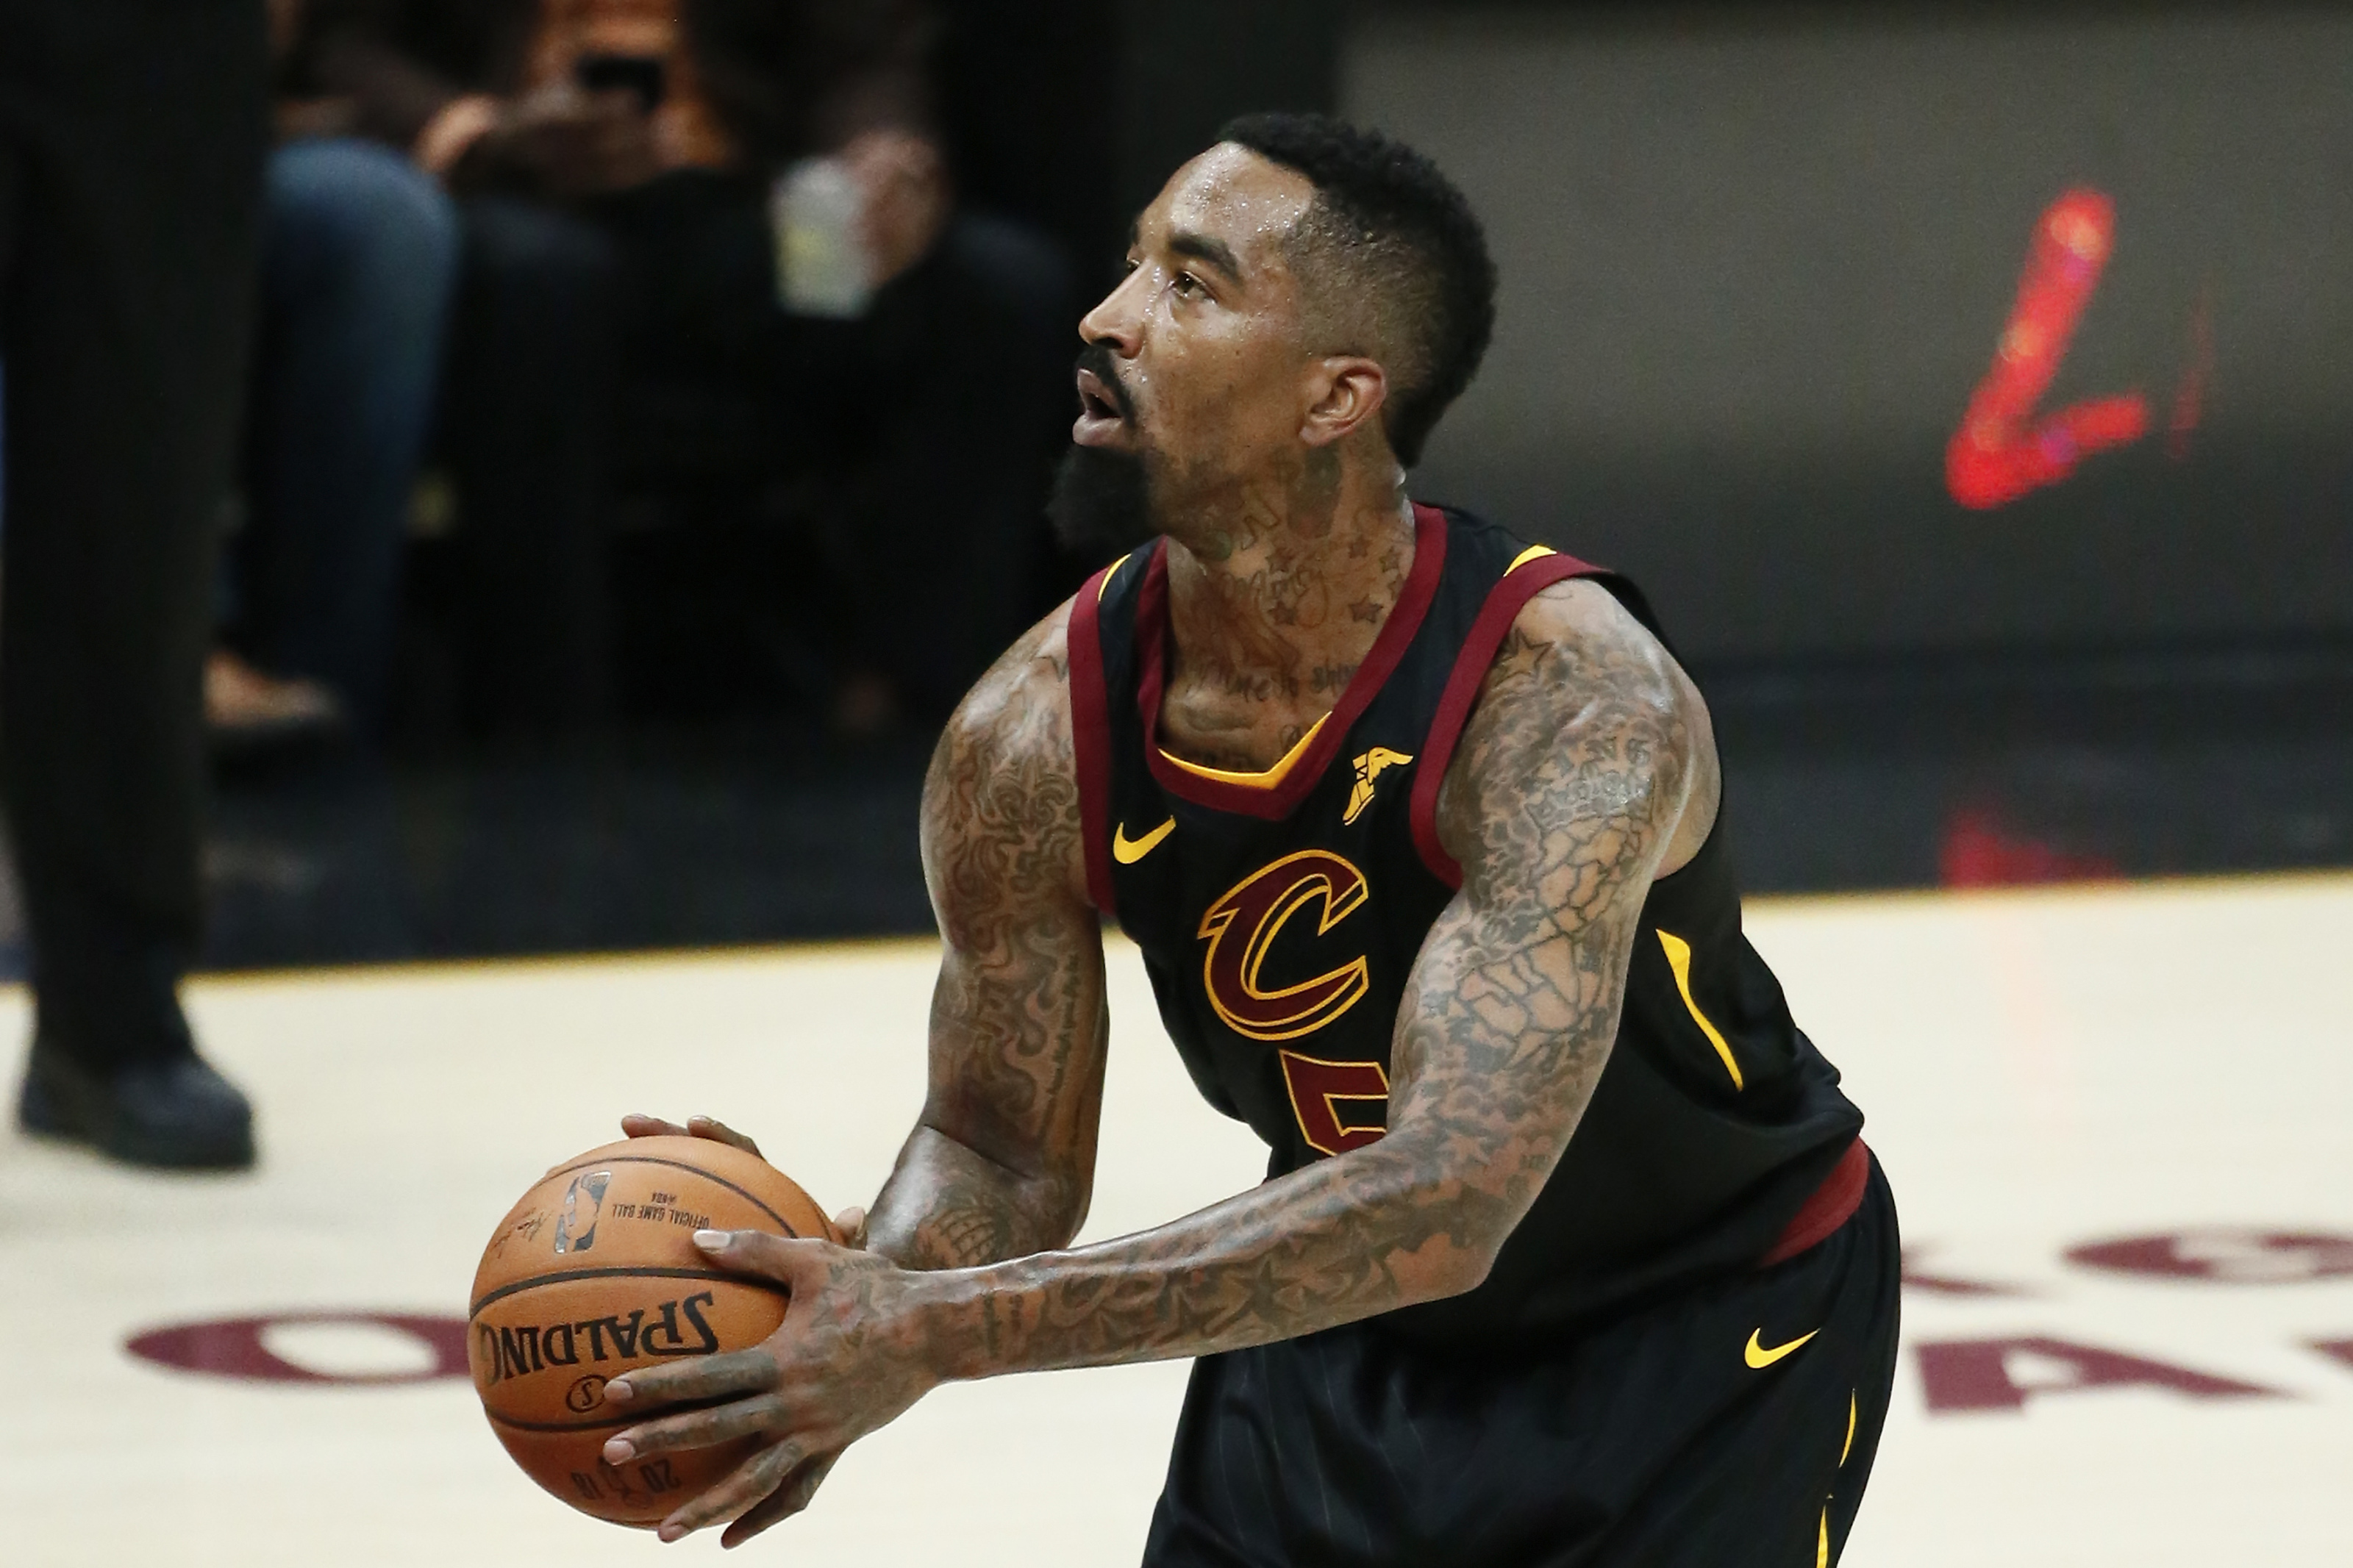 JR Smith will no longer be with the Cavs